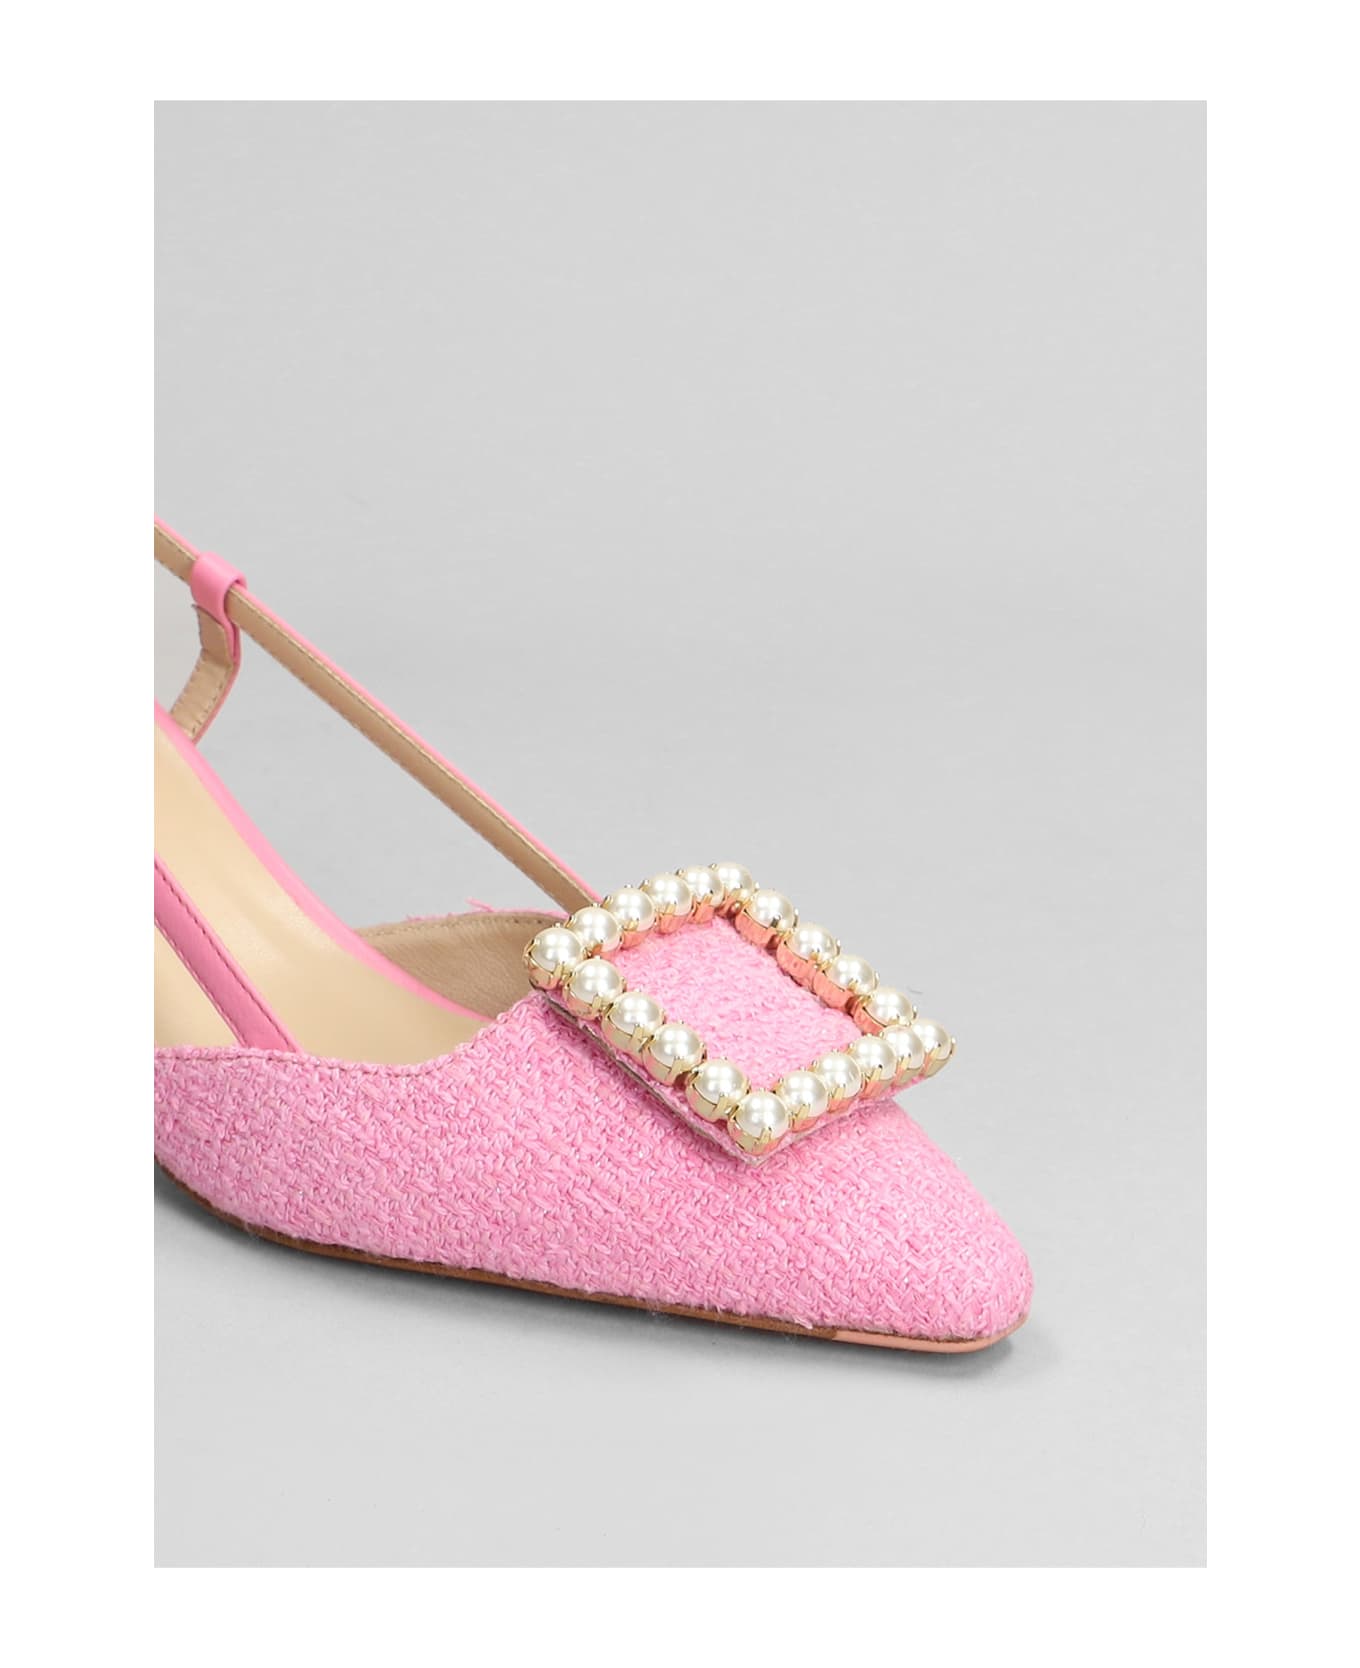 Roberto Festa Stefi Pumps In Rose-pink Leather And Fabric - rose-pink